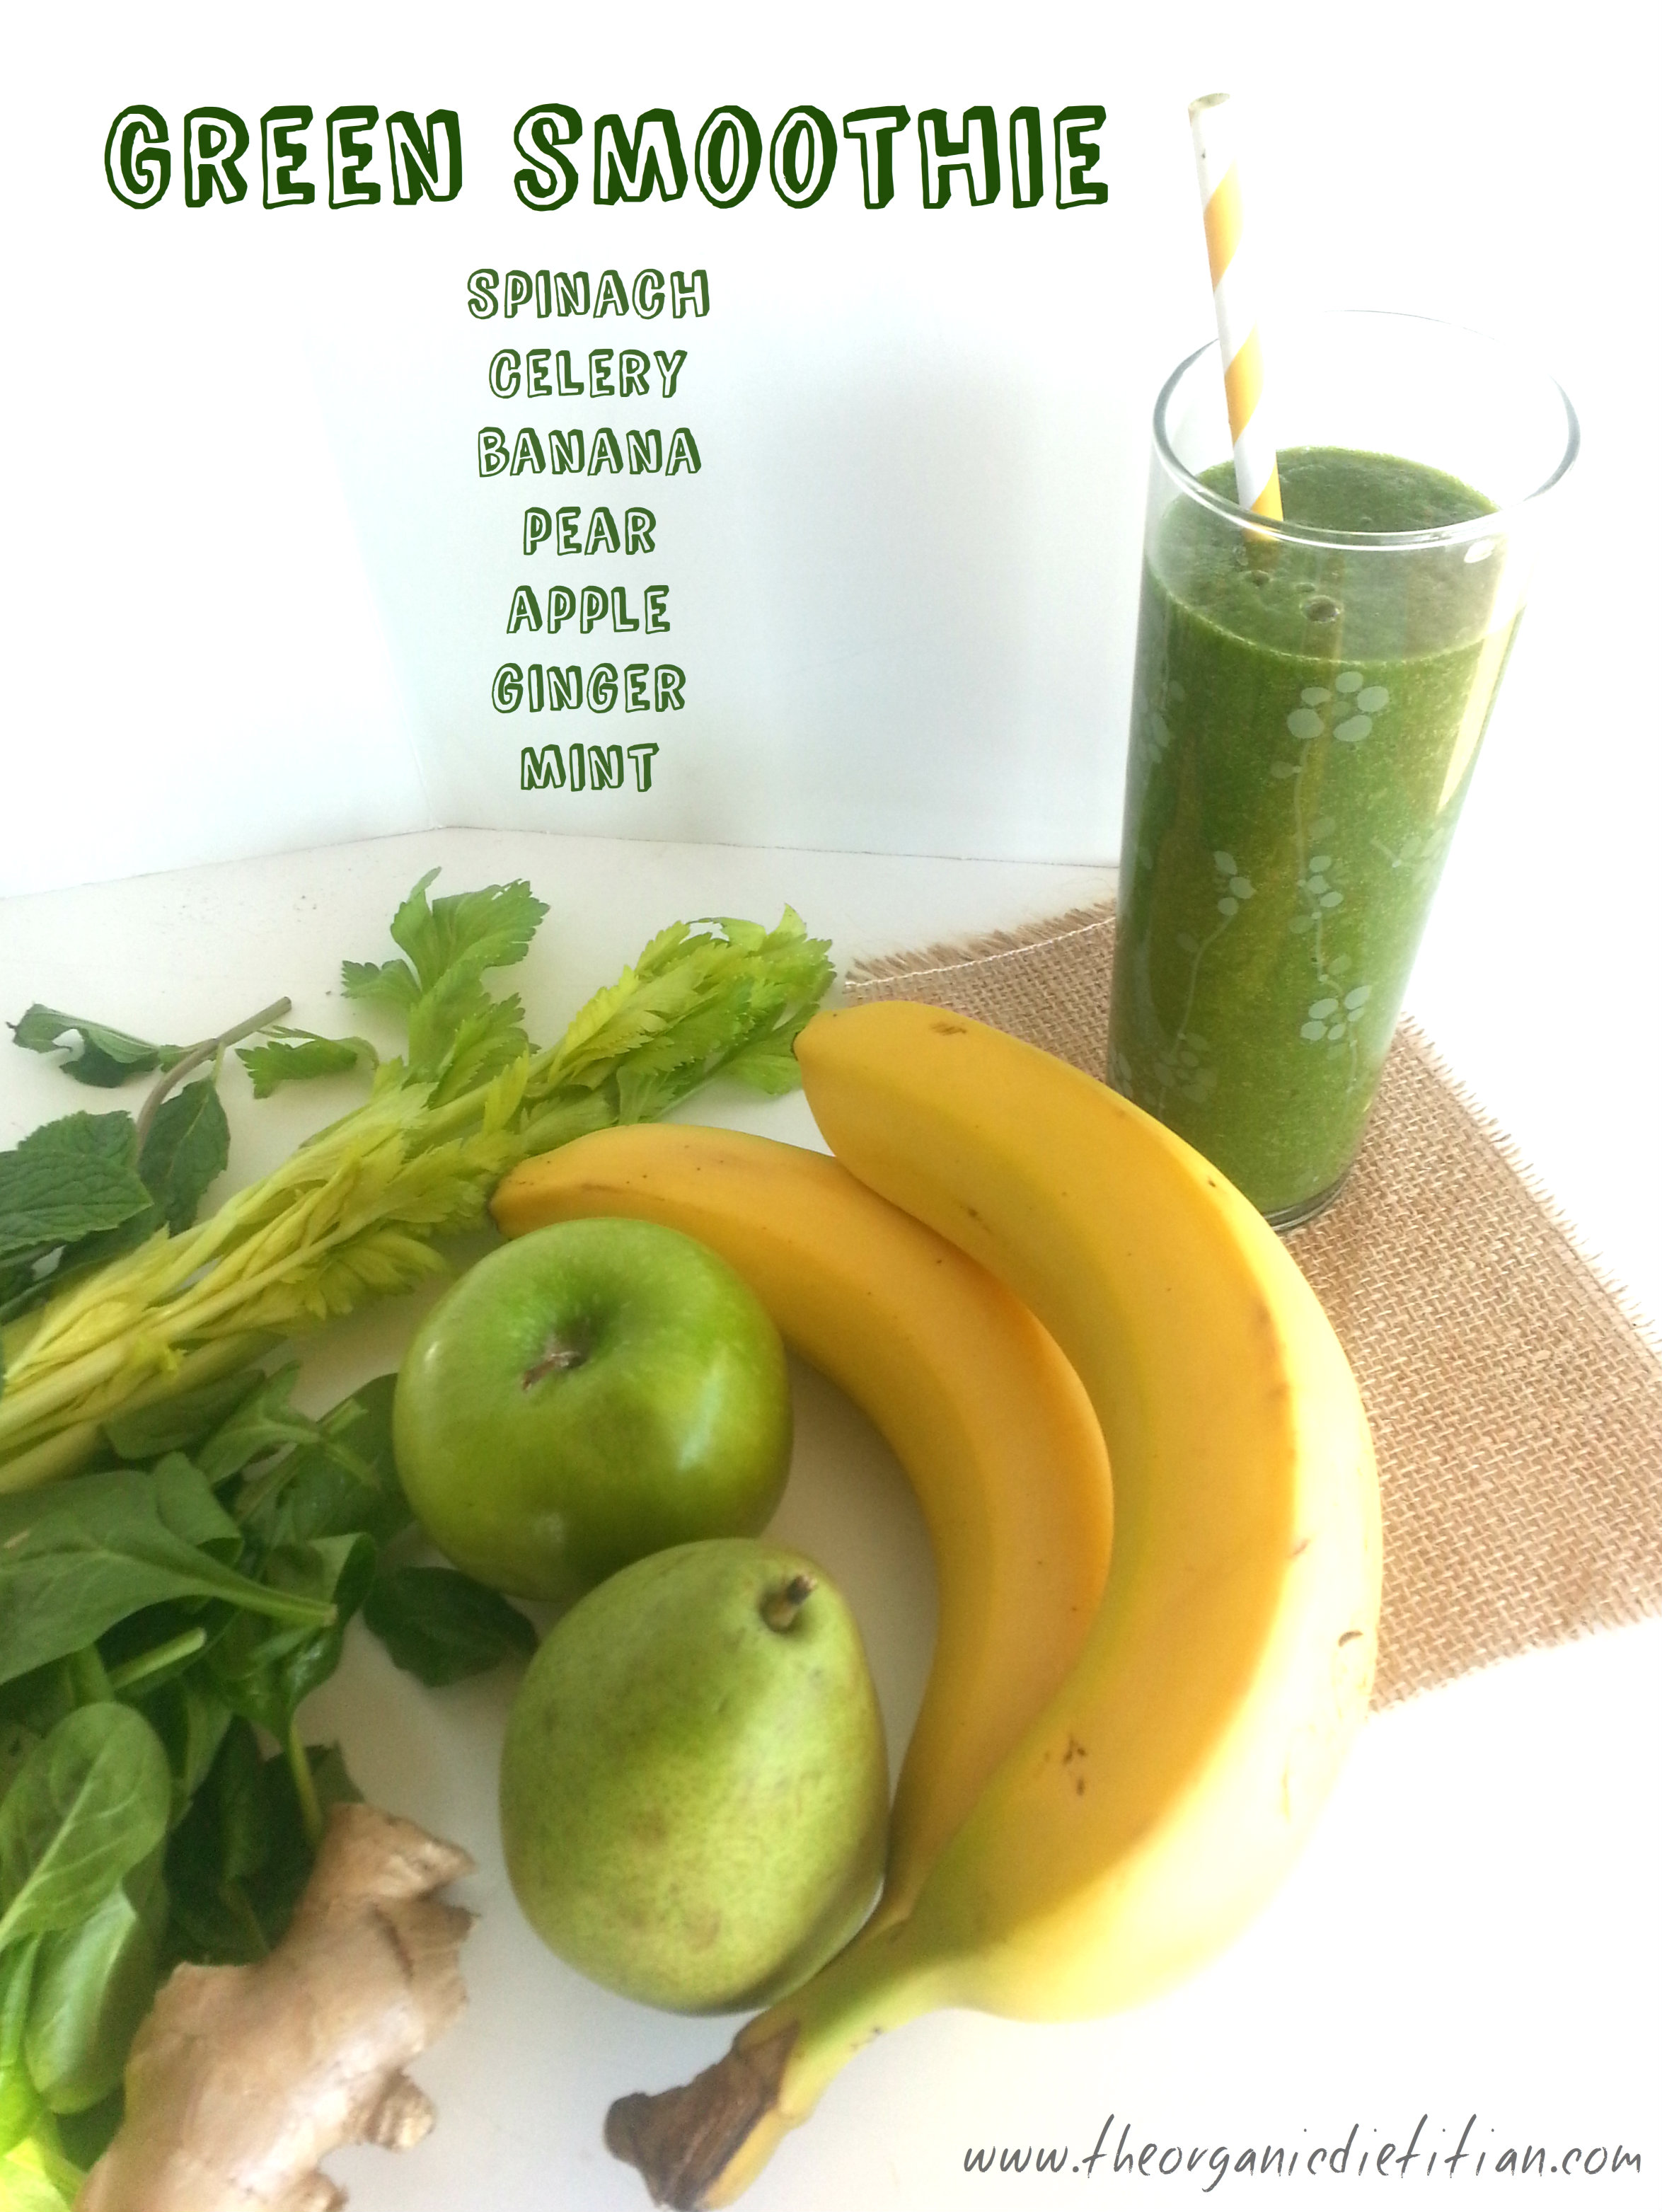 Get More Greens...Try a Green Smoothie or Green Juice - The Organic ...